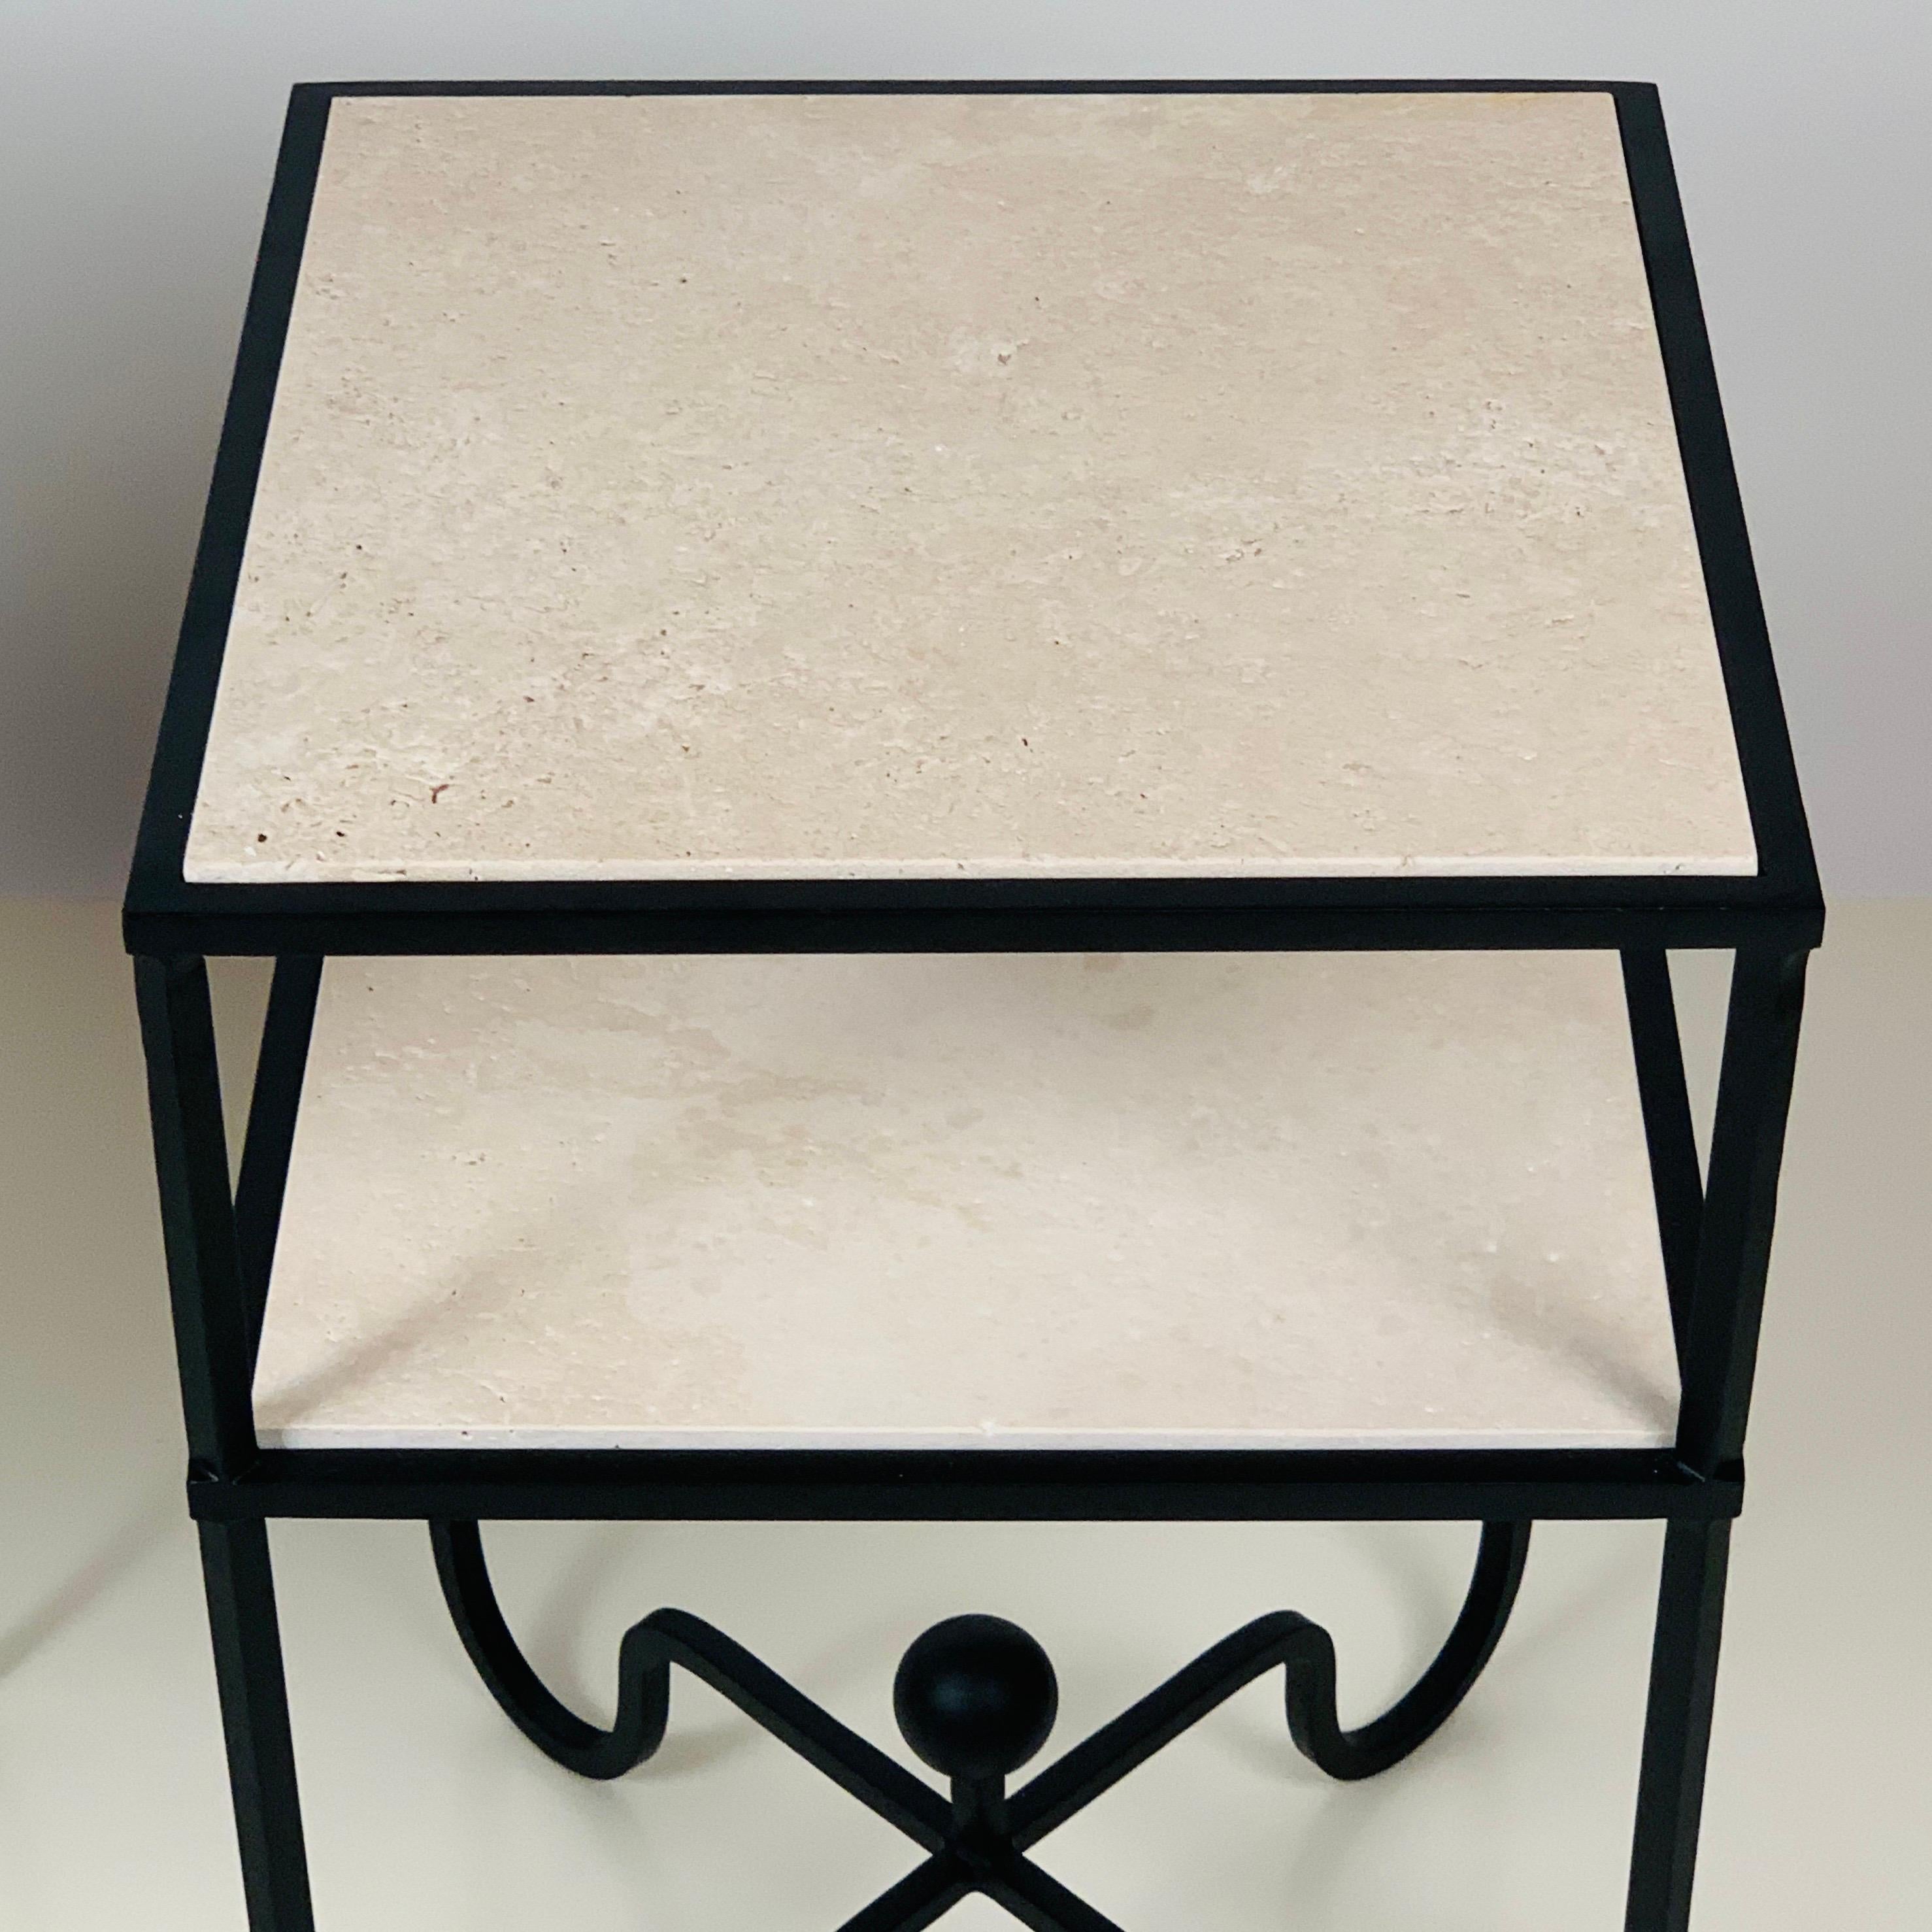 Pair of 2-Tier Entretoise Side Tables by Design Frères In New Condition For Sale In Los Angeles, CA